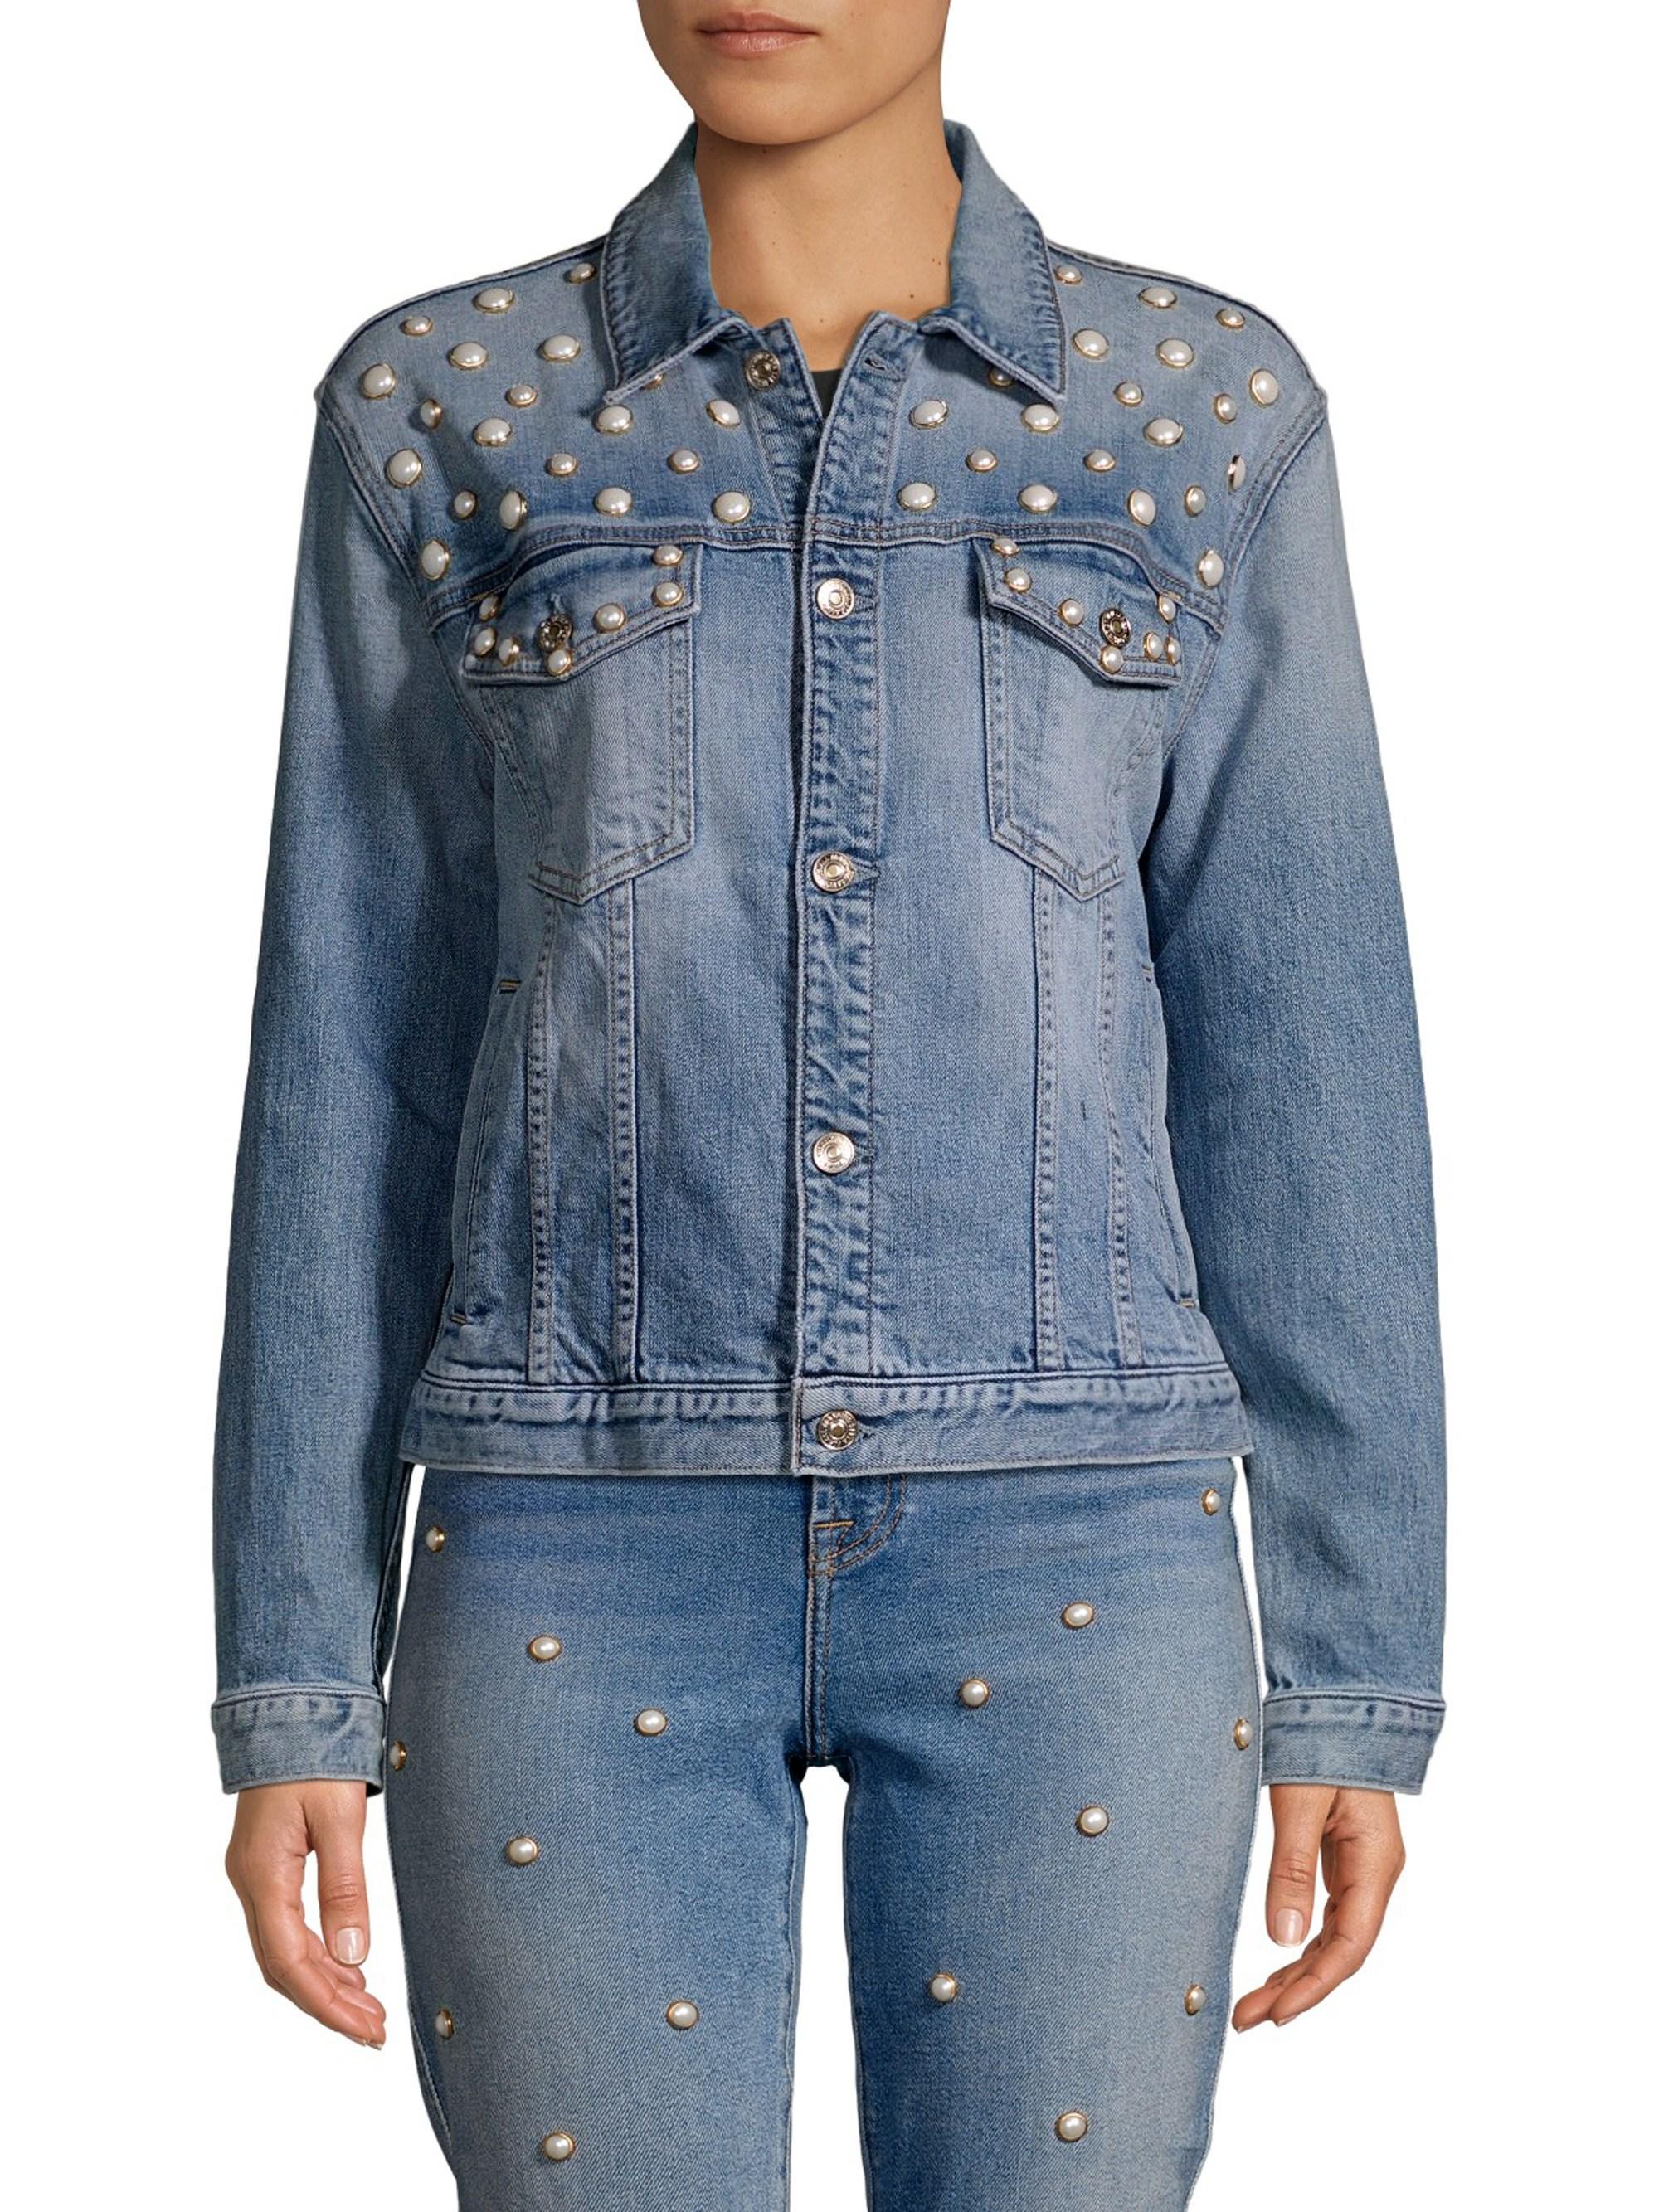 Lyst - 7 For All Mankind Faux Pearl Embellished Denim Jacket in Blue